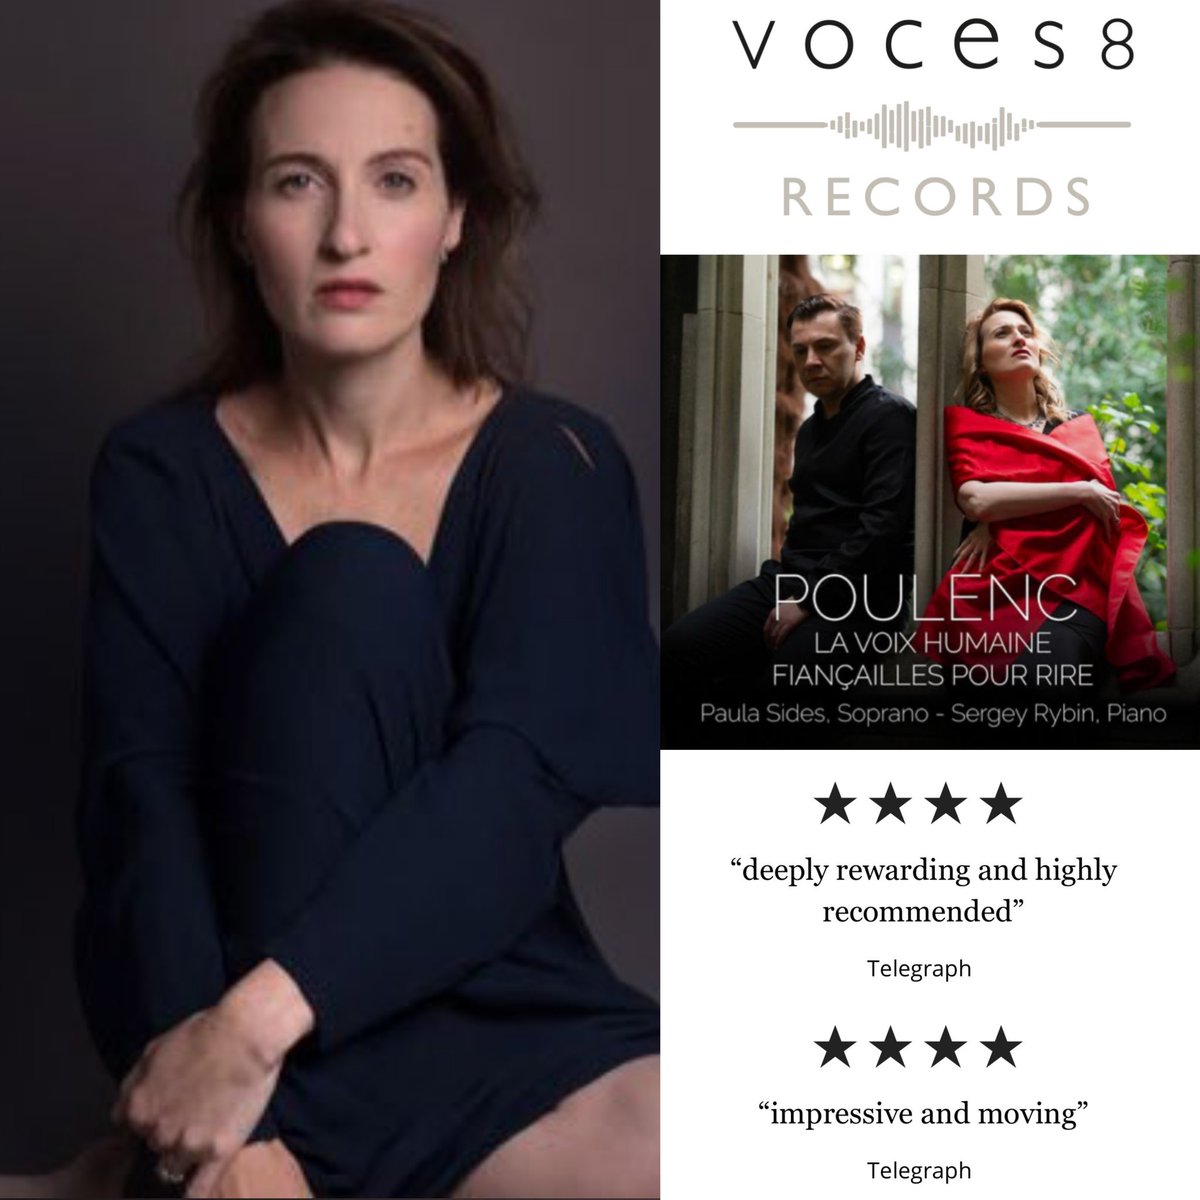 What better way to celebrate International Women's Day than with the CD launch of soprano @sidesp1 and pianist Sergey Rybin - this promises to be an unforgettable evening! @v8_foundation #VOCES8Records